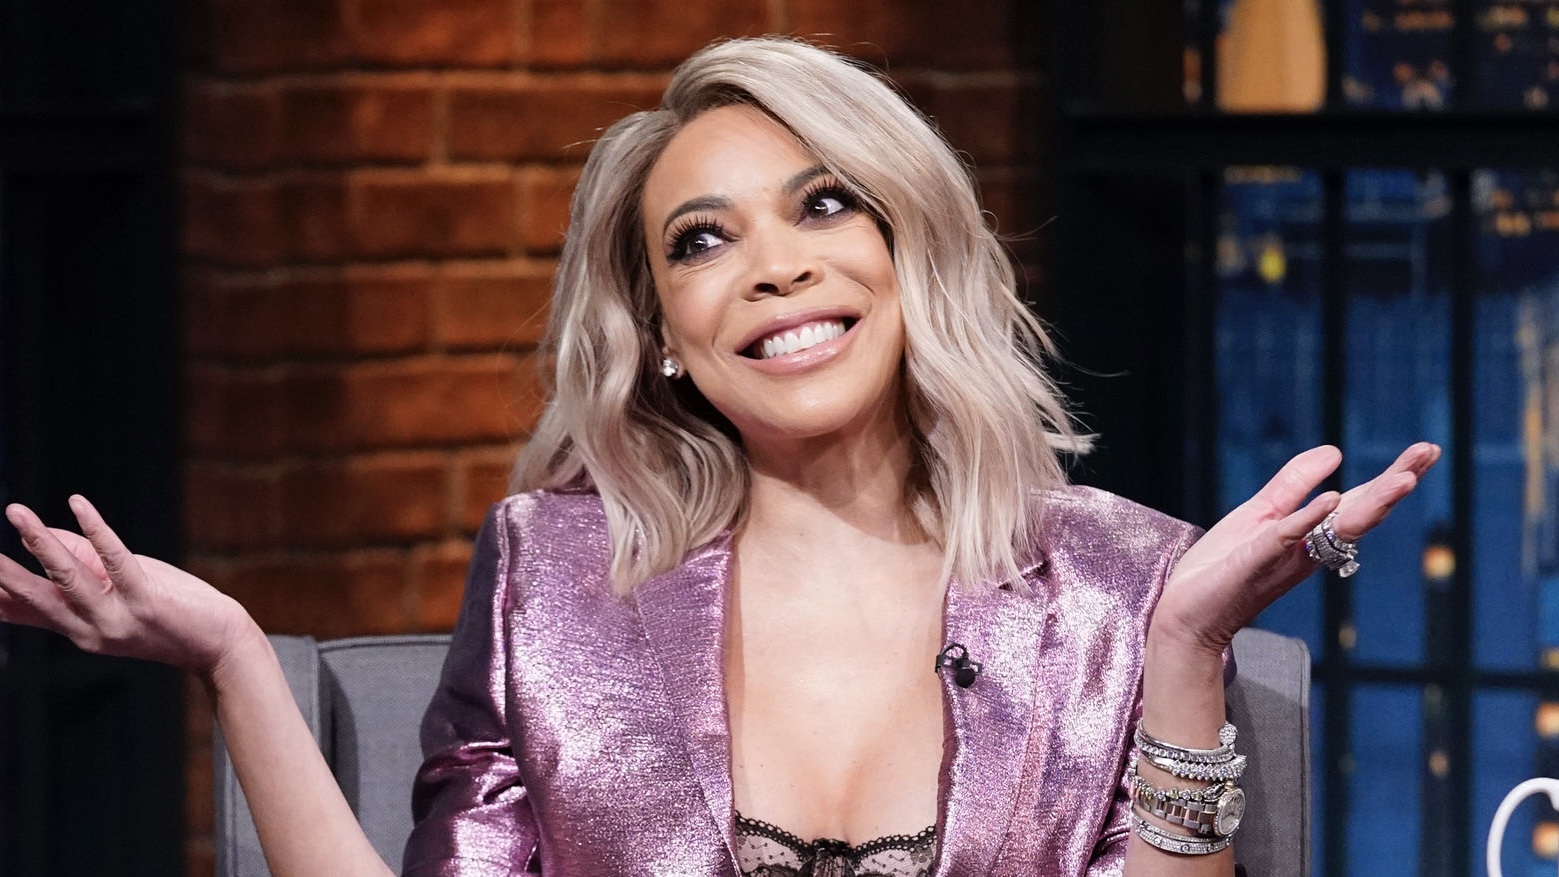 LATE NIGHT WITH SETH MEYERS -- Episode 750 -- Pictured: Talk show host, Wendy Williams, on October 30, 2018 --